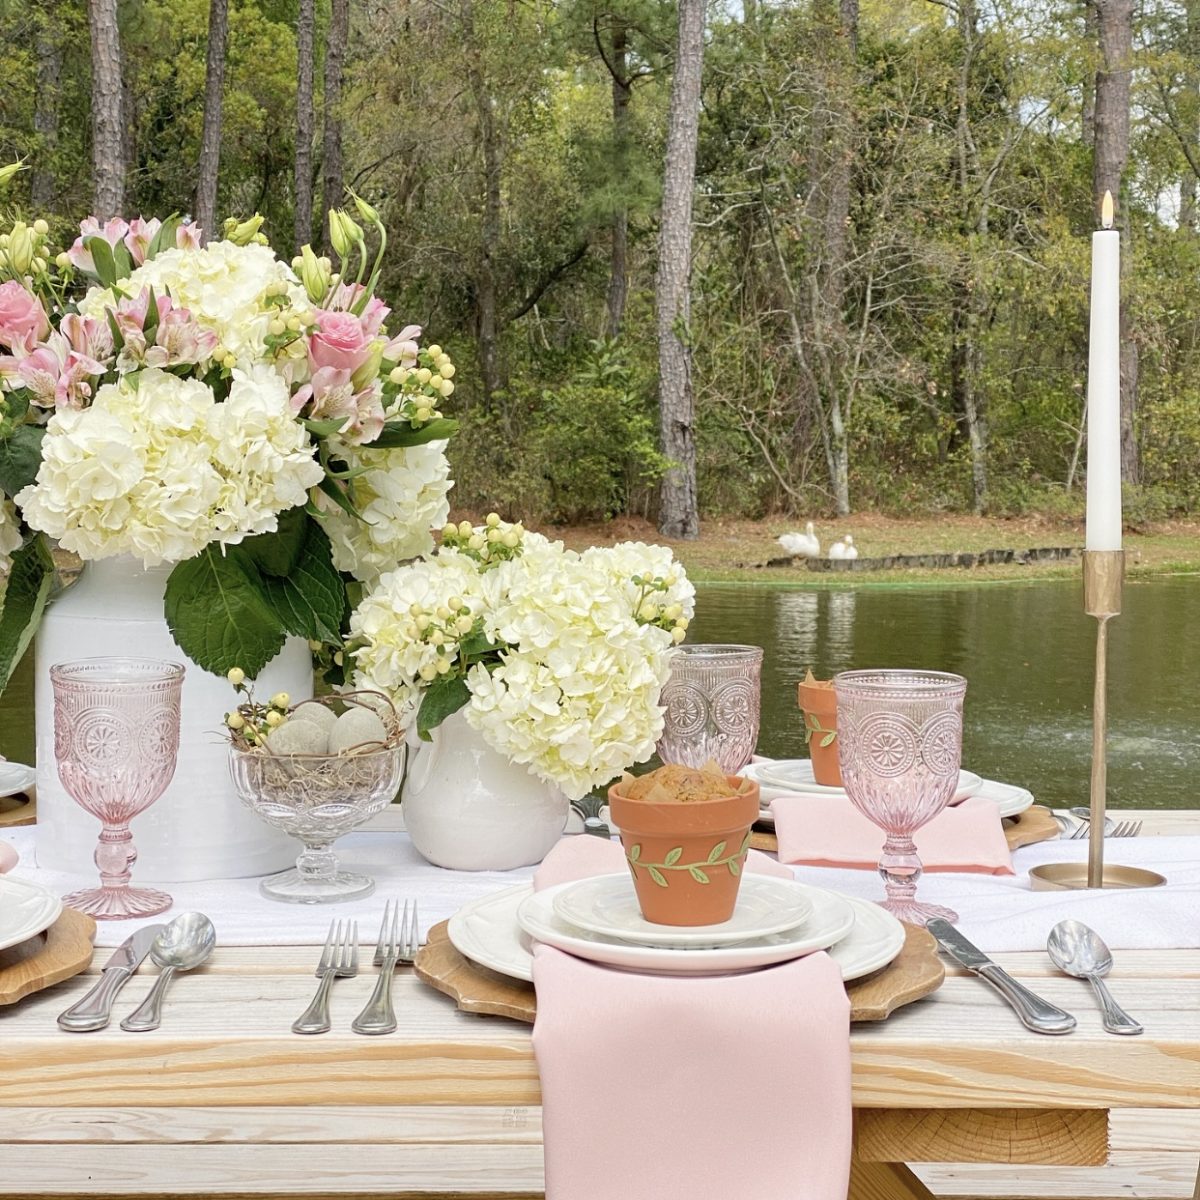 Simple spring table set by the pond with ducks in the background.